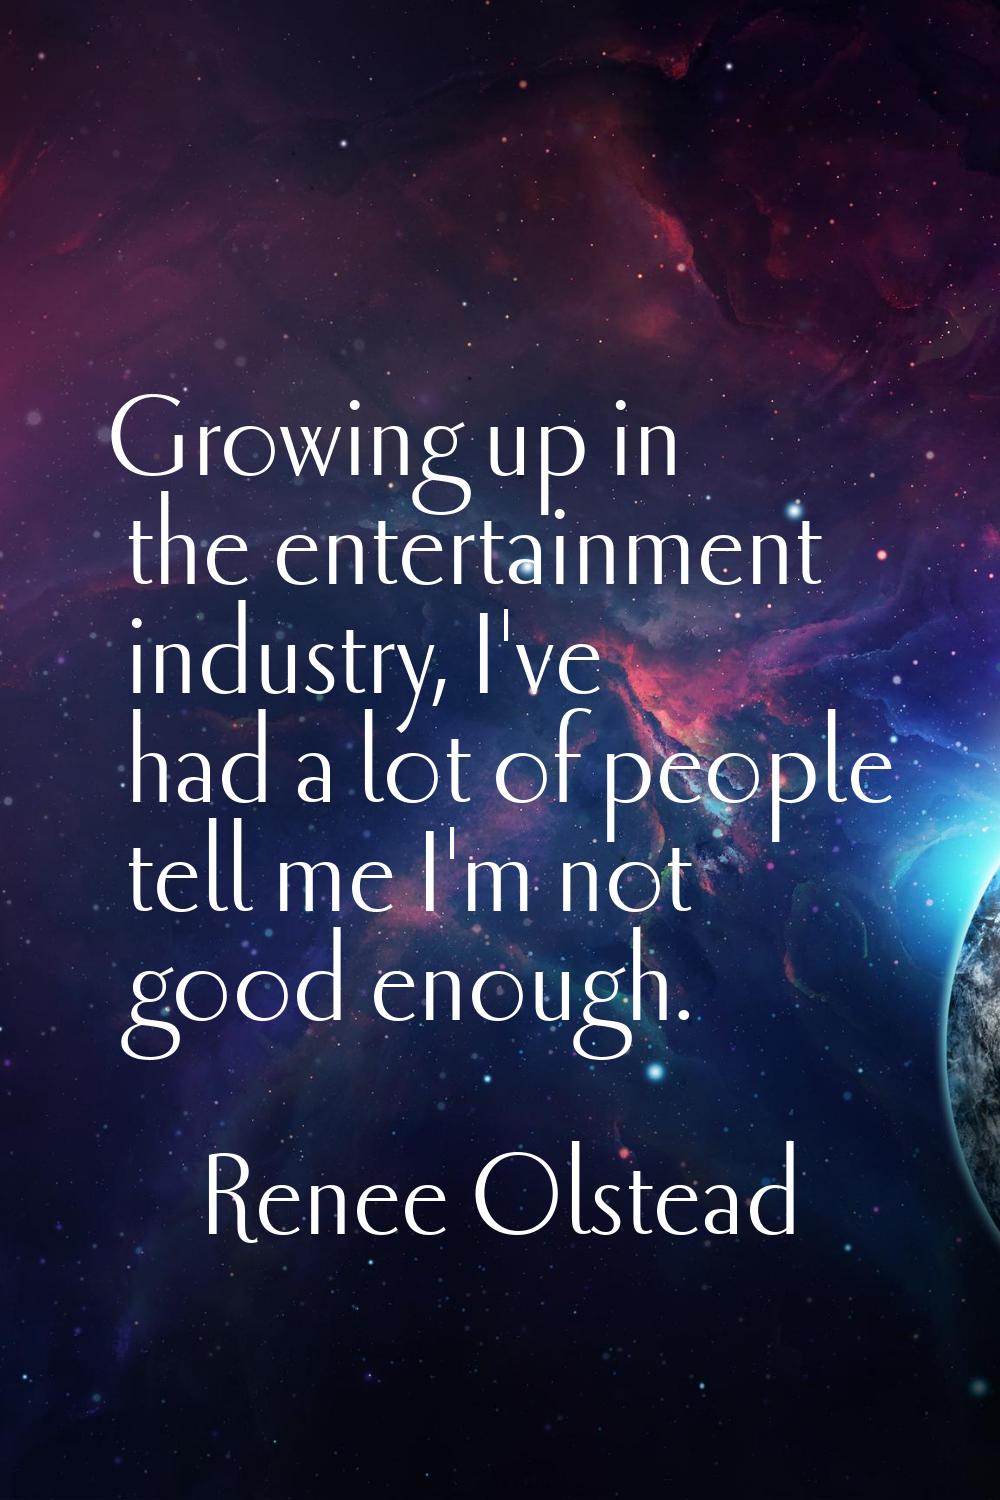 Growing up in the entertainment industry, I've had a lot of people tell me I'm not good enough.